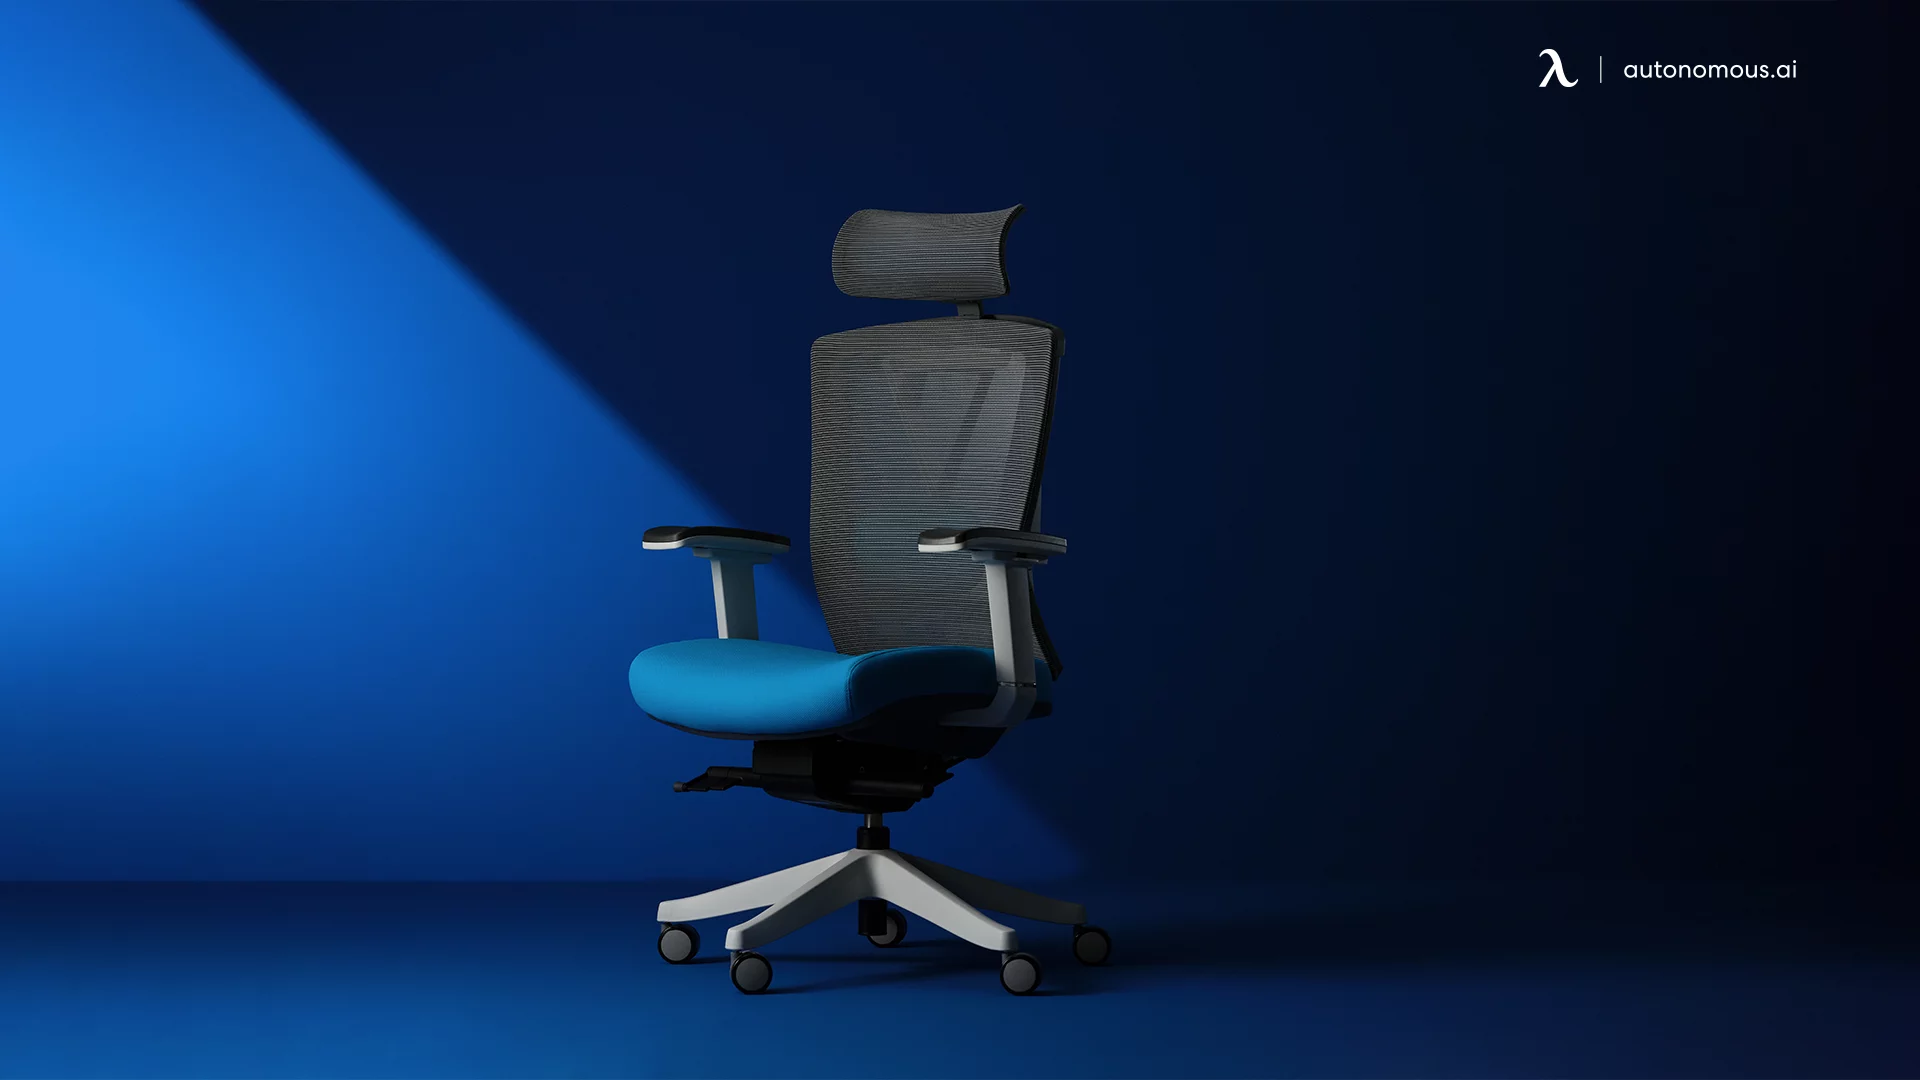 Ergonomic Chair Father's day gifts